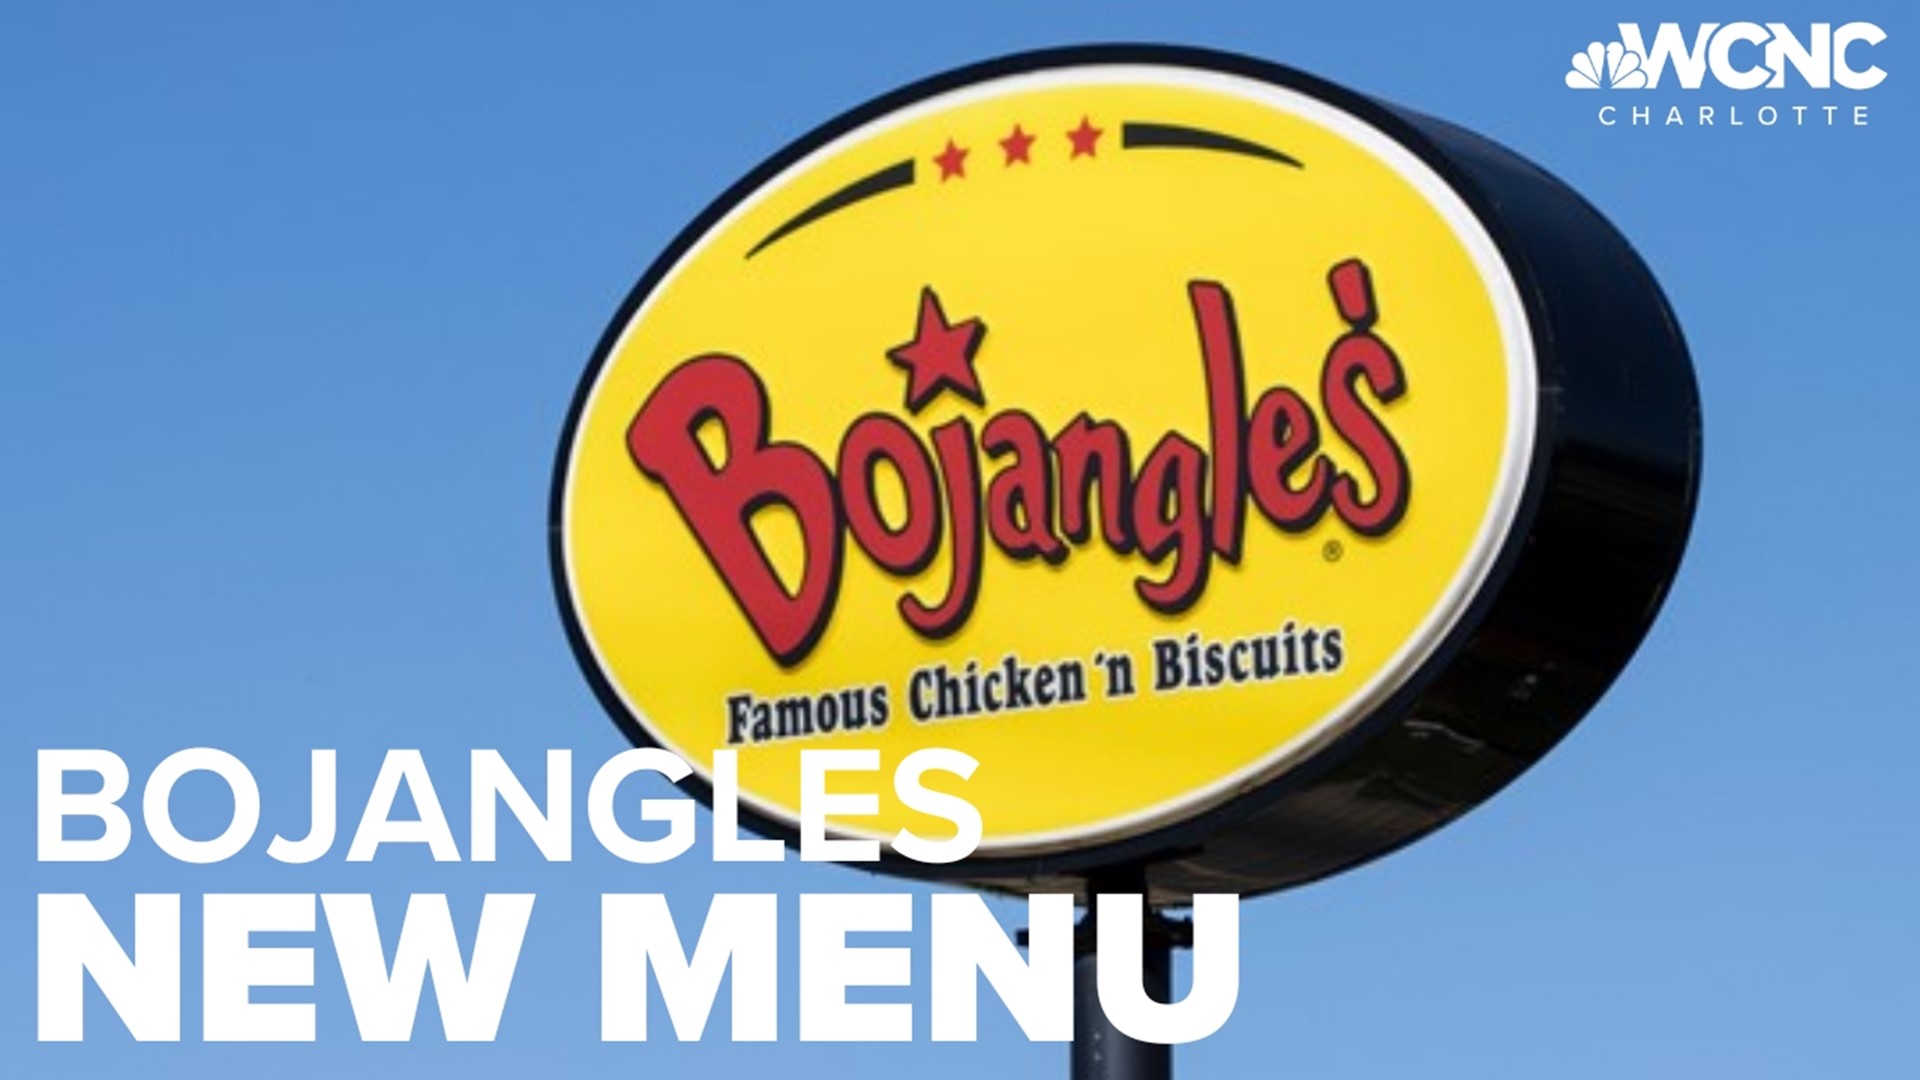 The CEO made the announcement that Bojangles would try out new menu items.